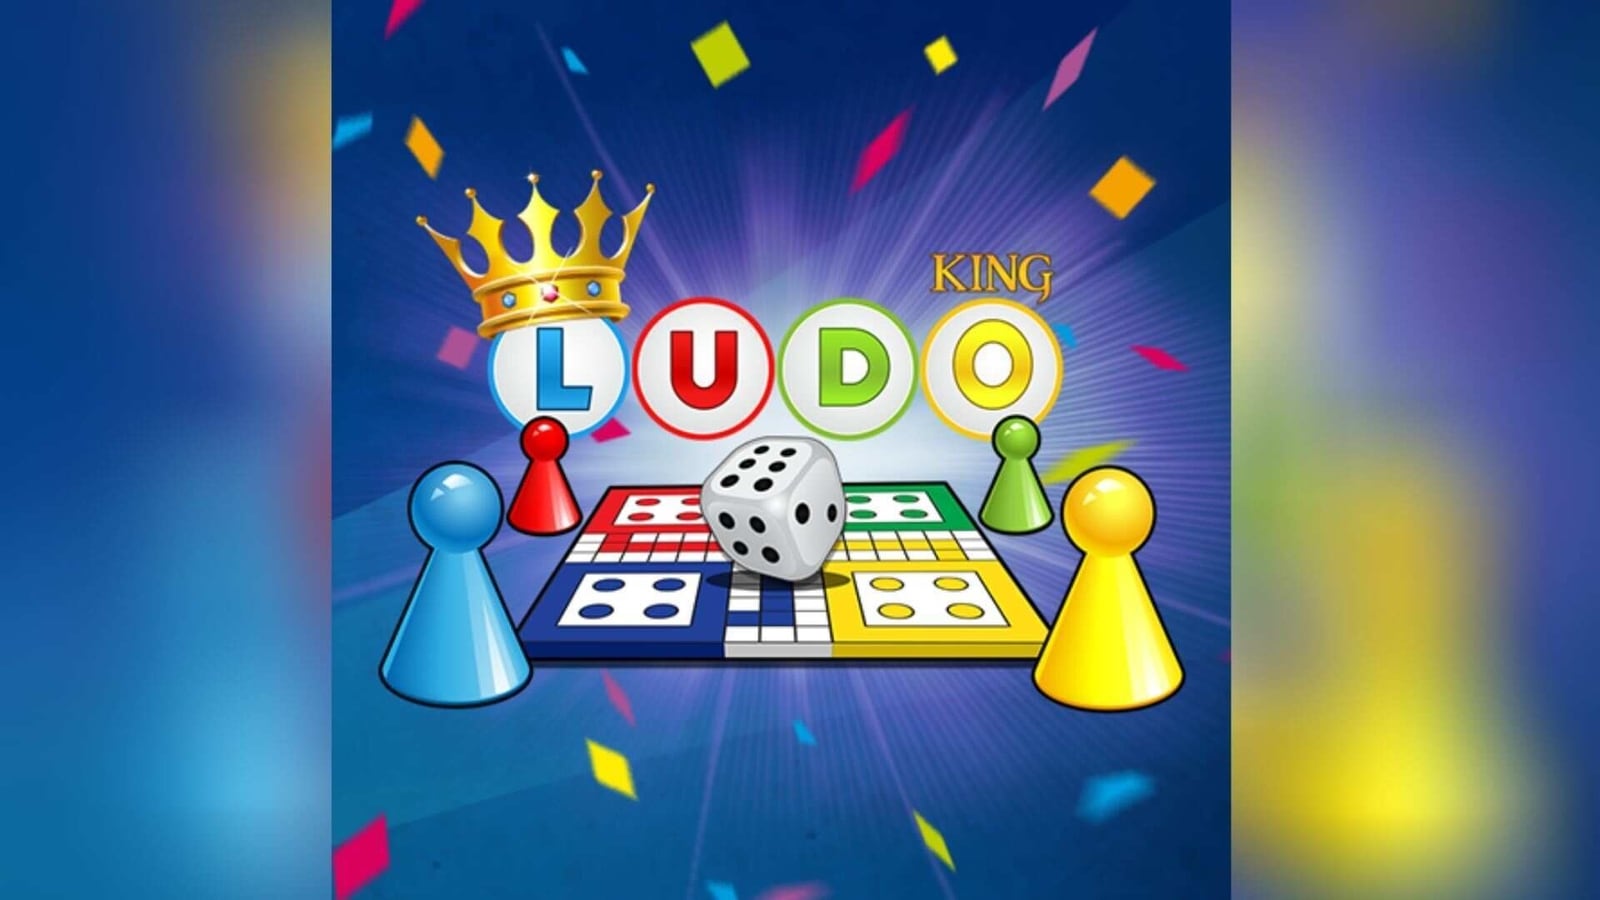 Can Ludo King thrive in a post-Covid world?